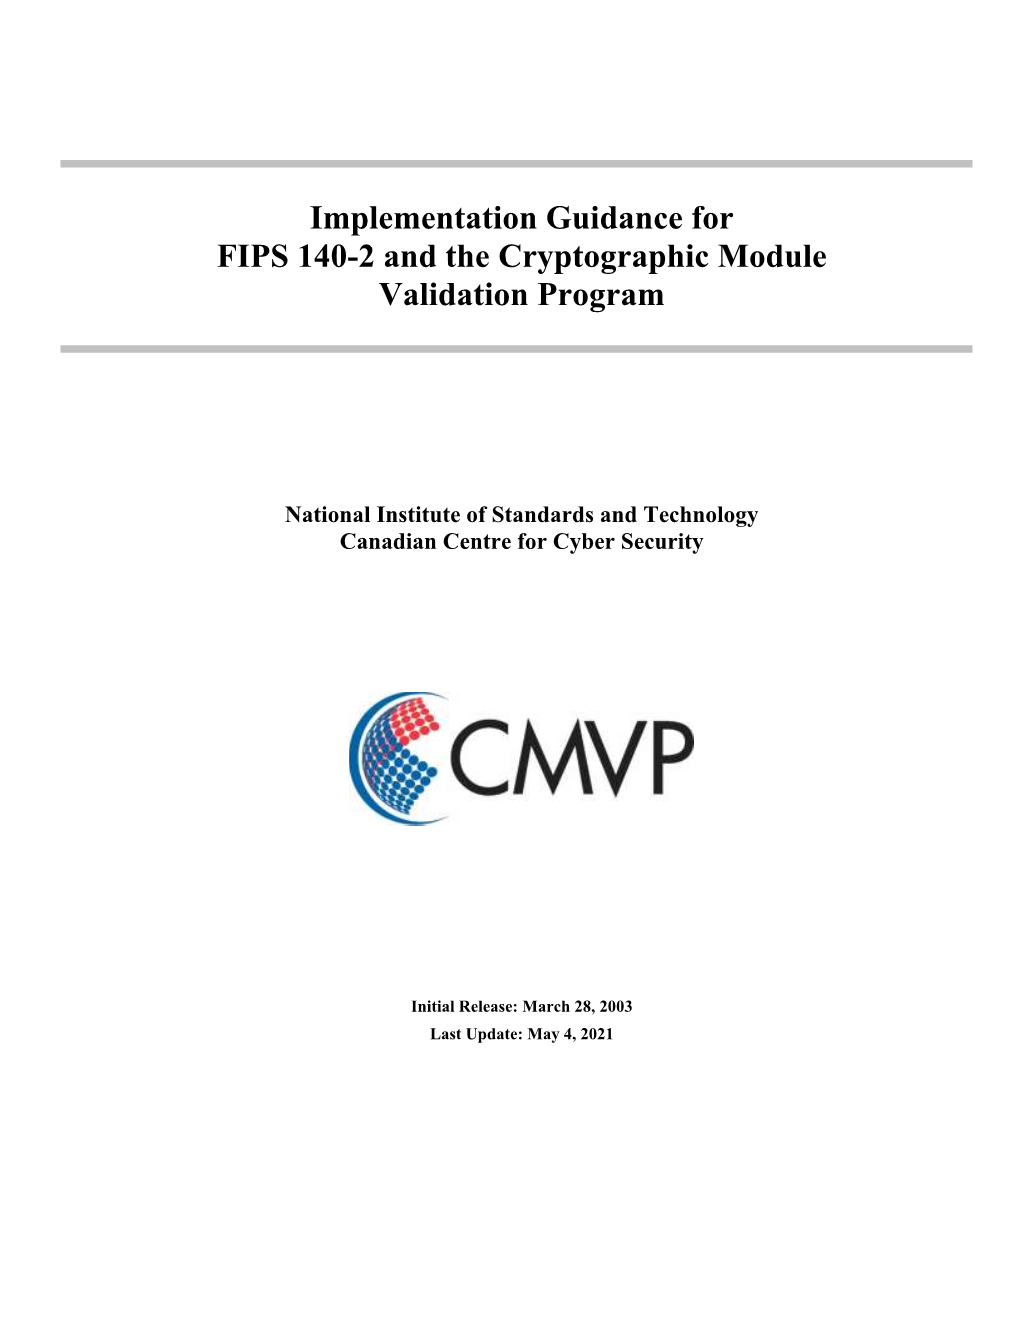 Implementation Guidance for FIPS 140-2 and the Cryptographic Module Validation Program